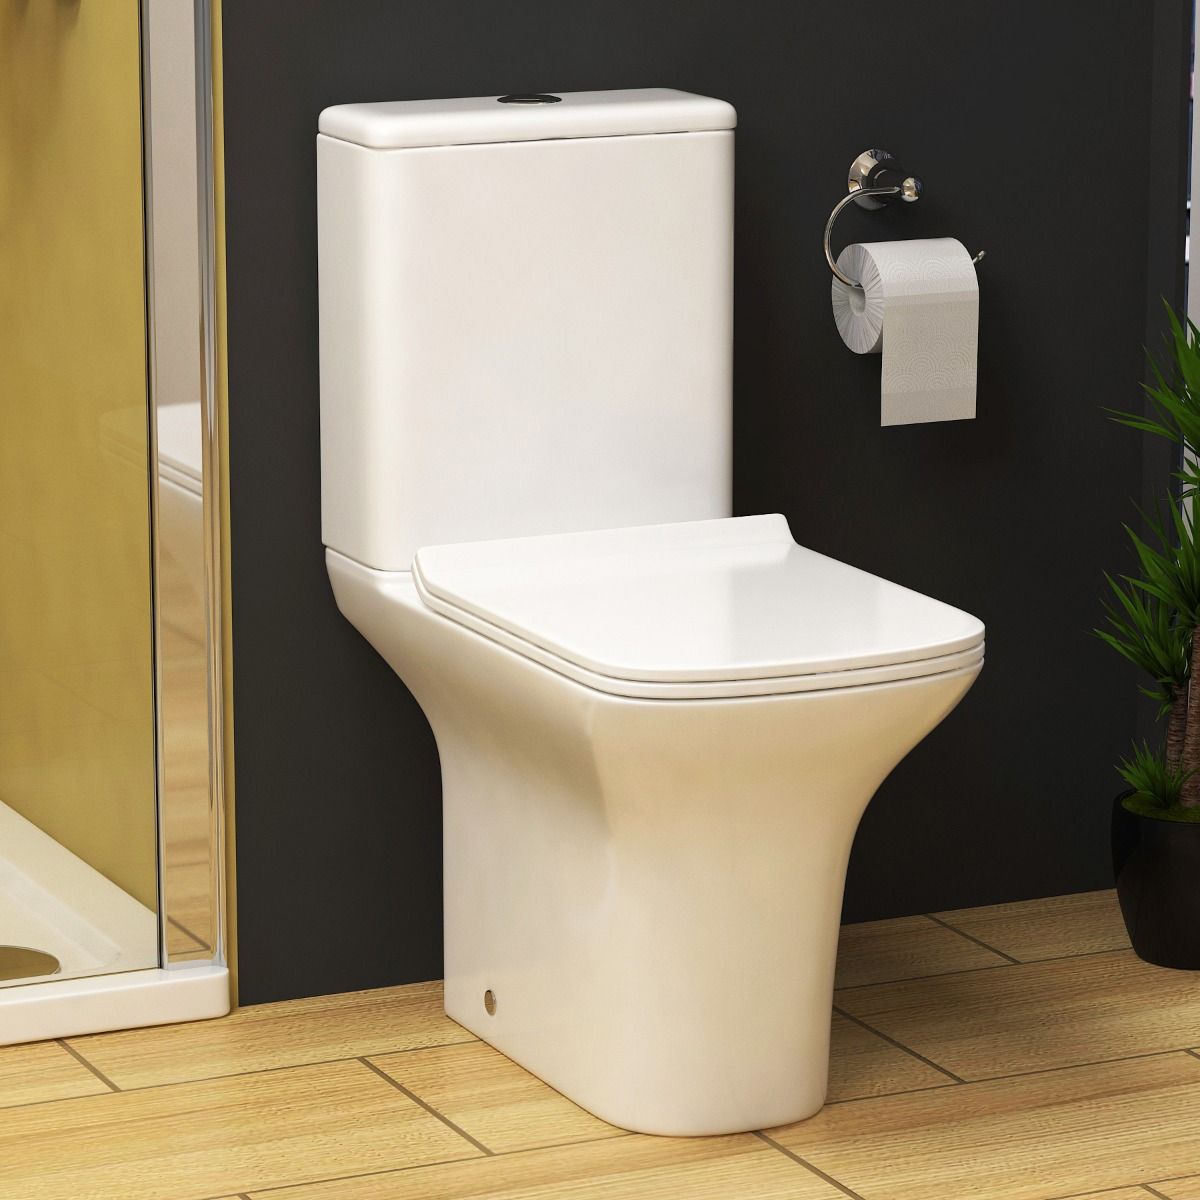 Type of Toilets for Your Bathroom - Buying Guide!